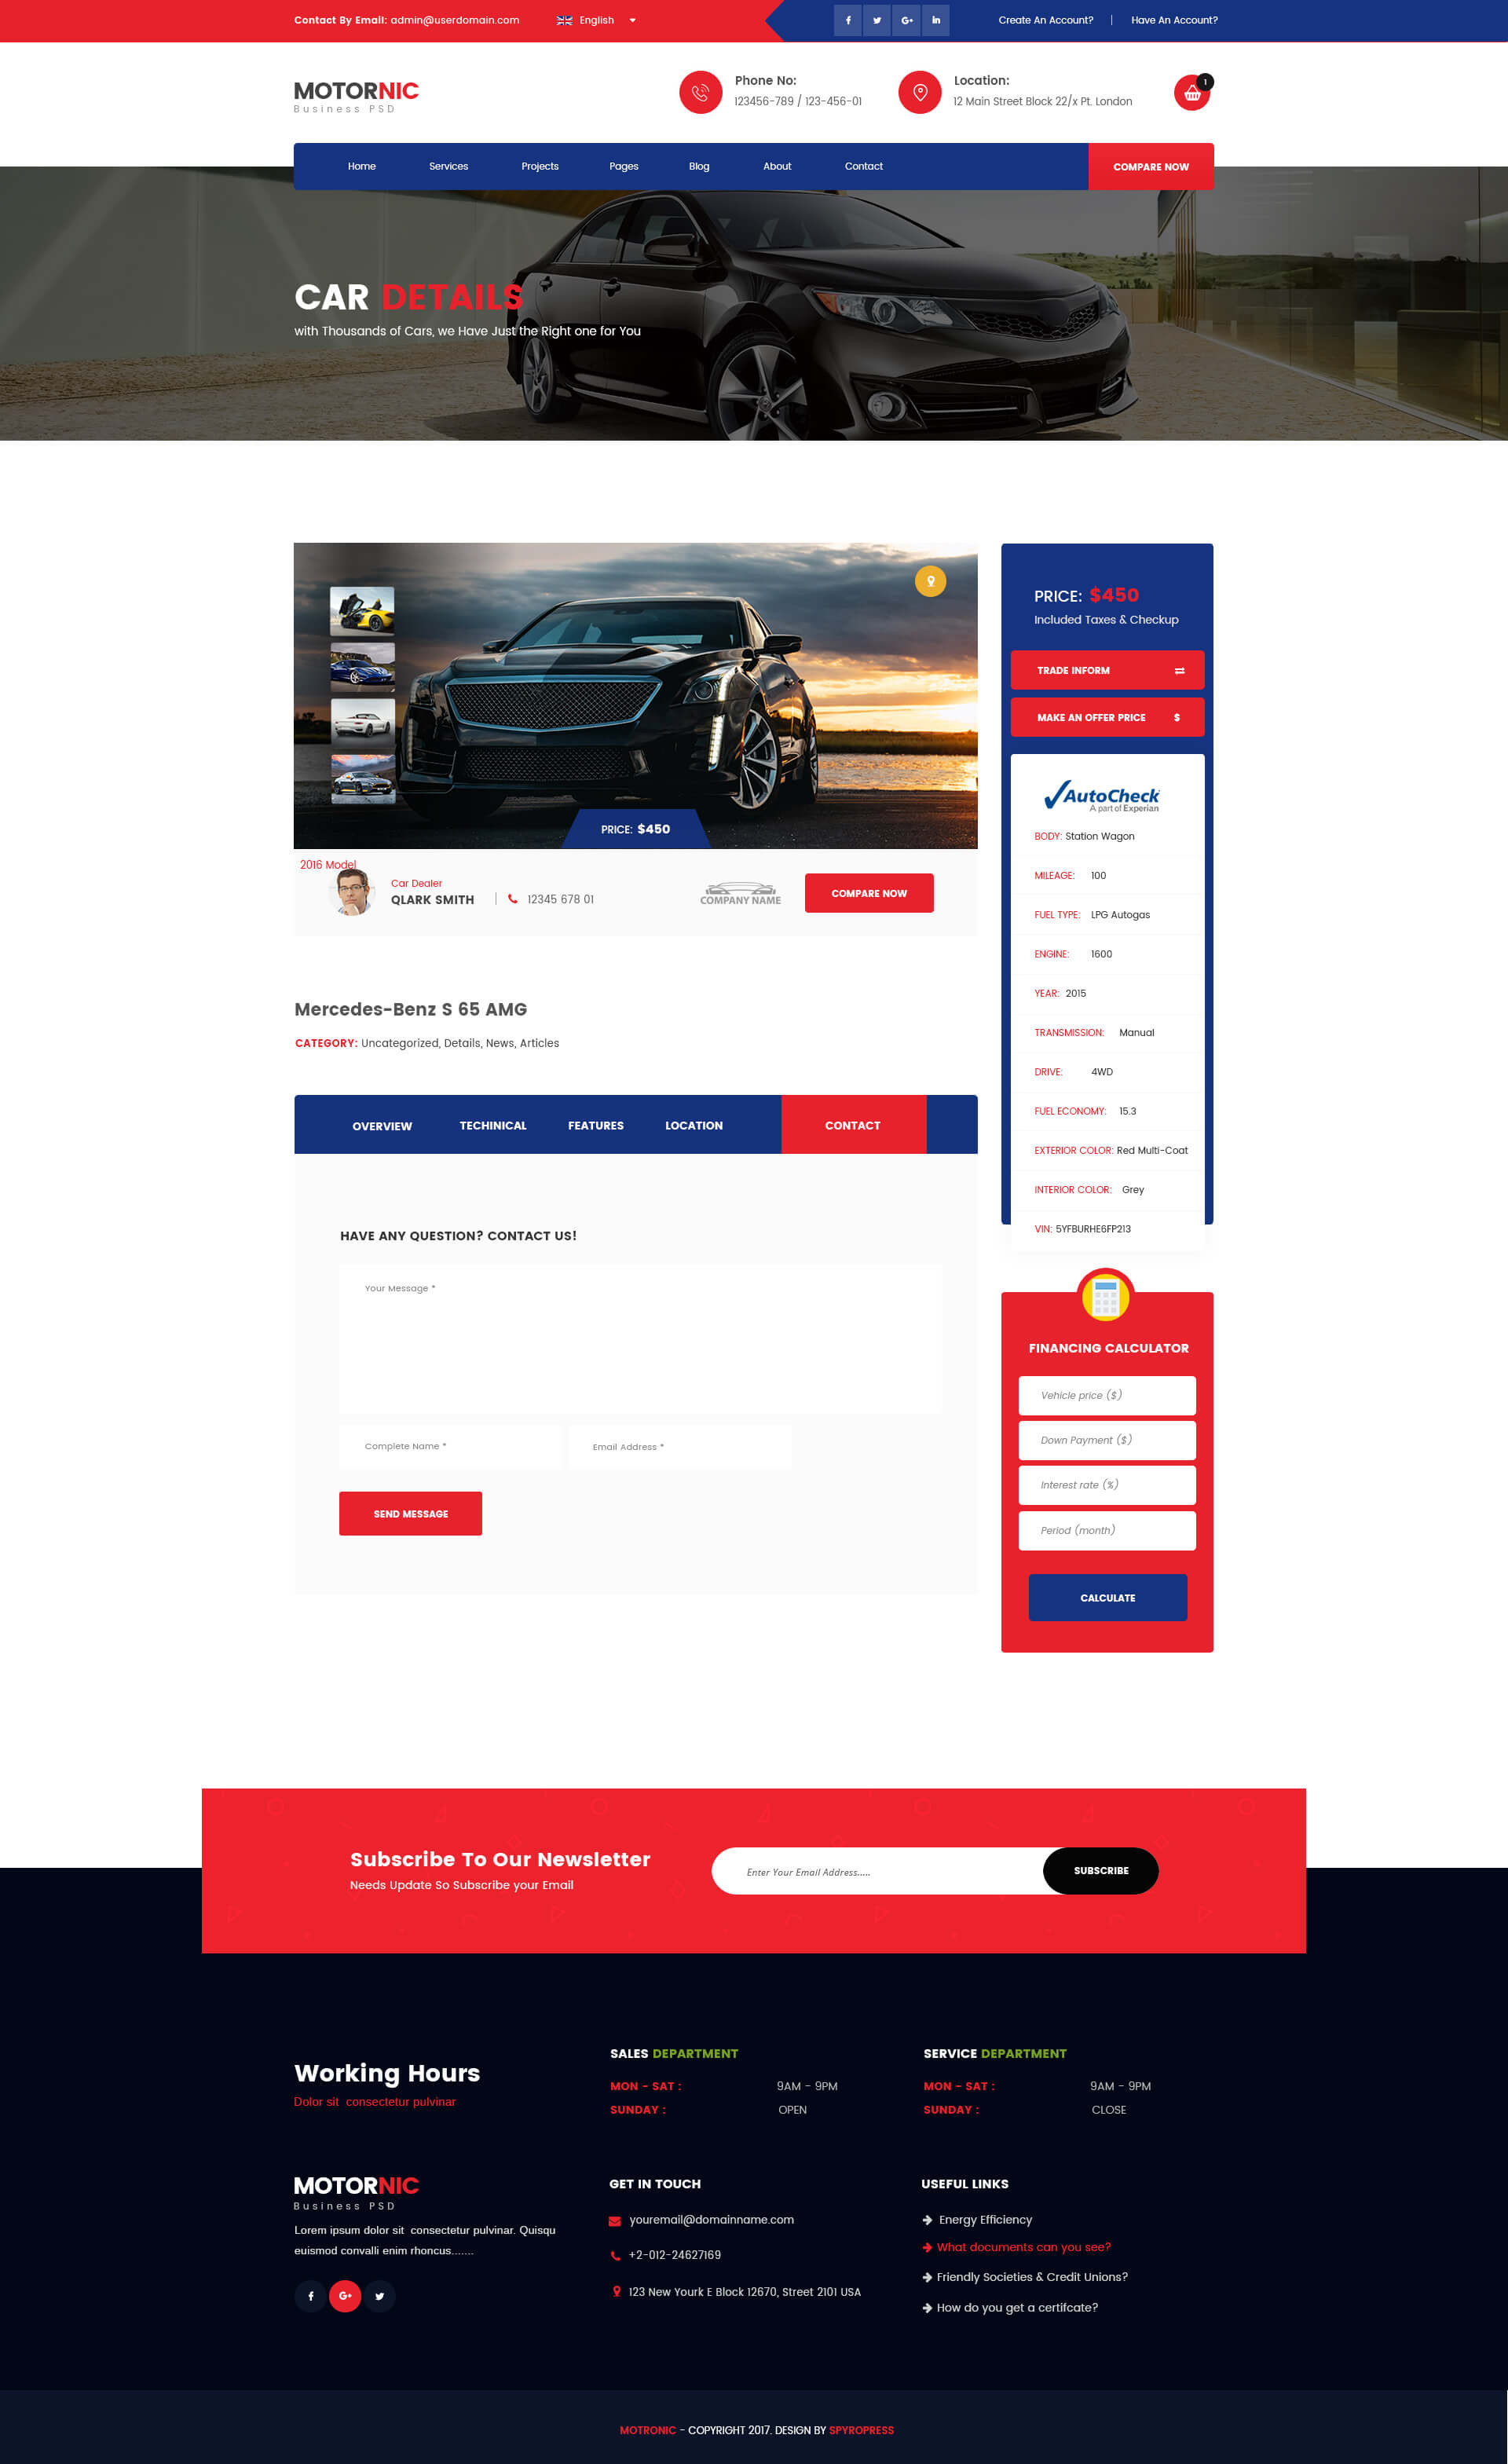 car dealer website template free awesome design motornic vehicle marketplace psd template by spyropress